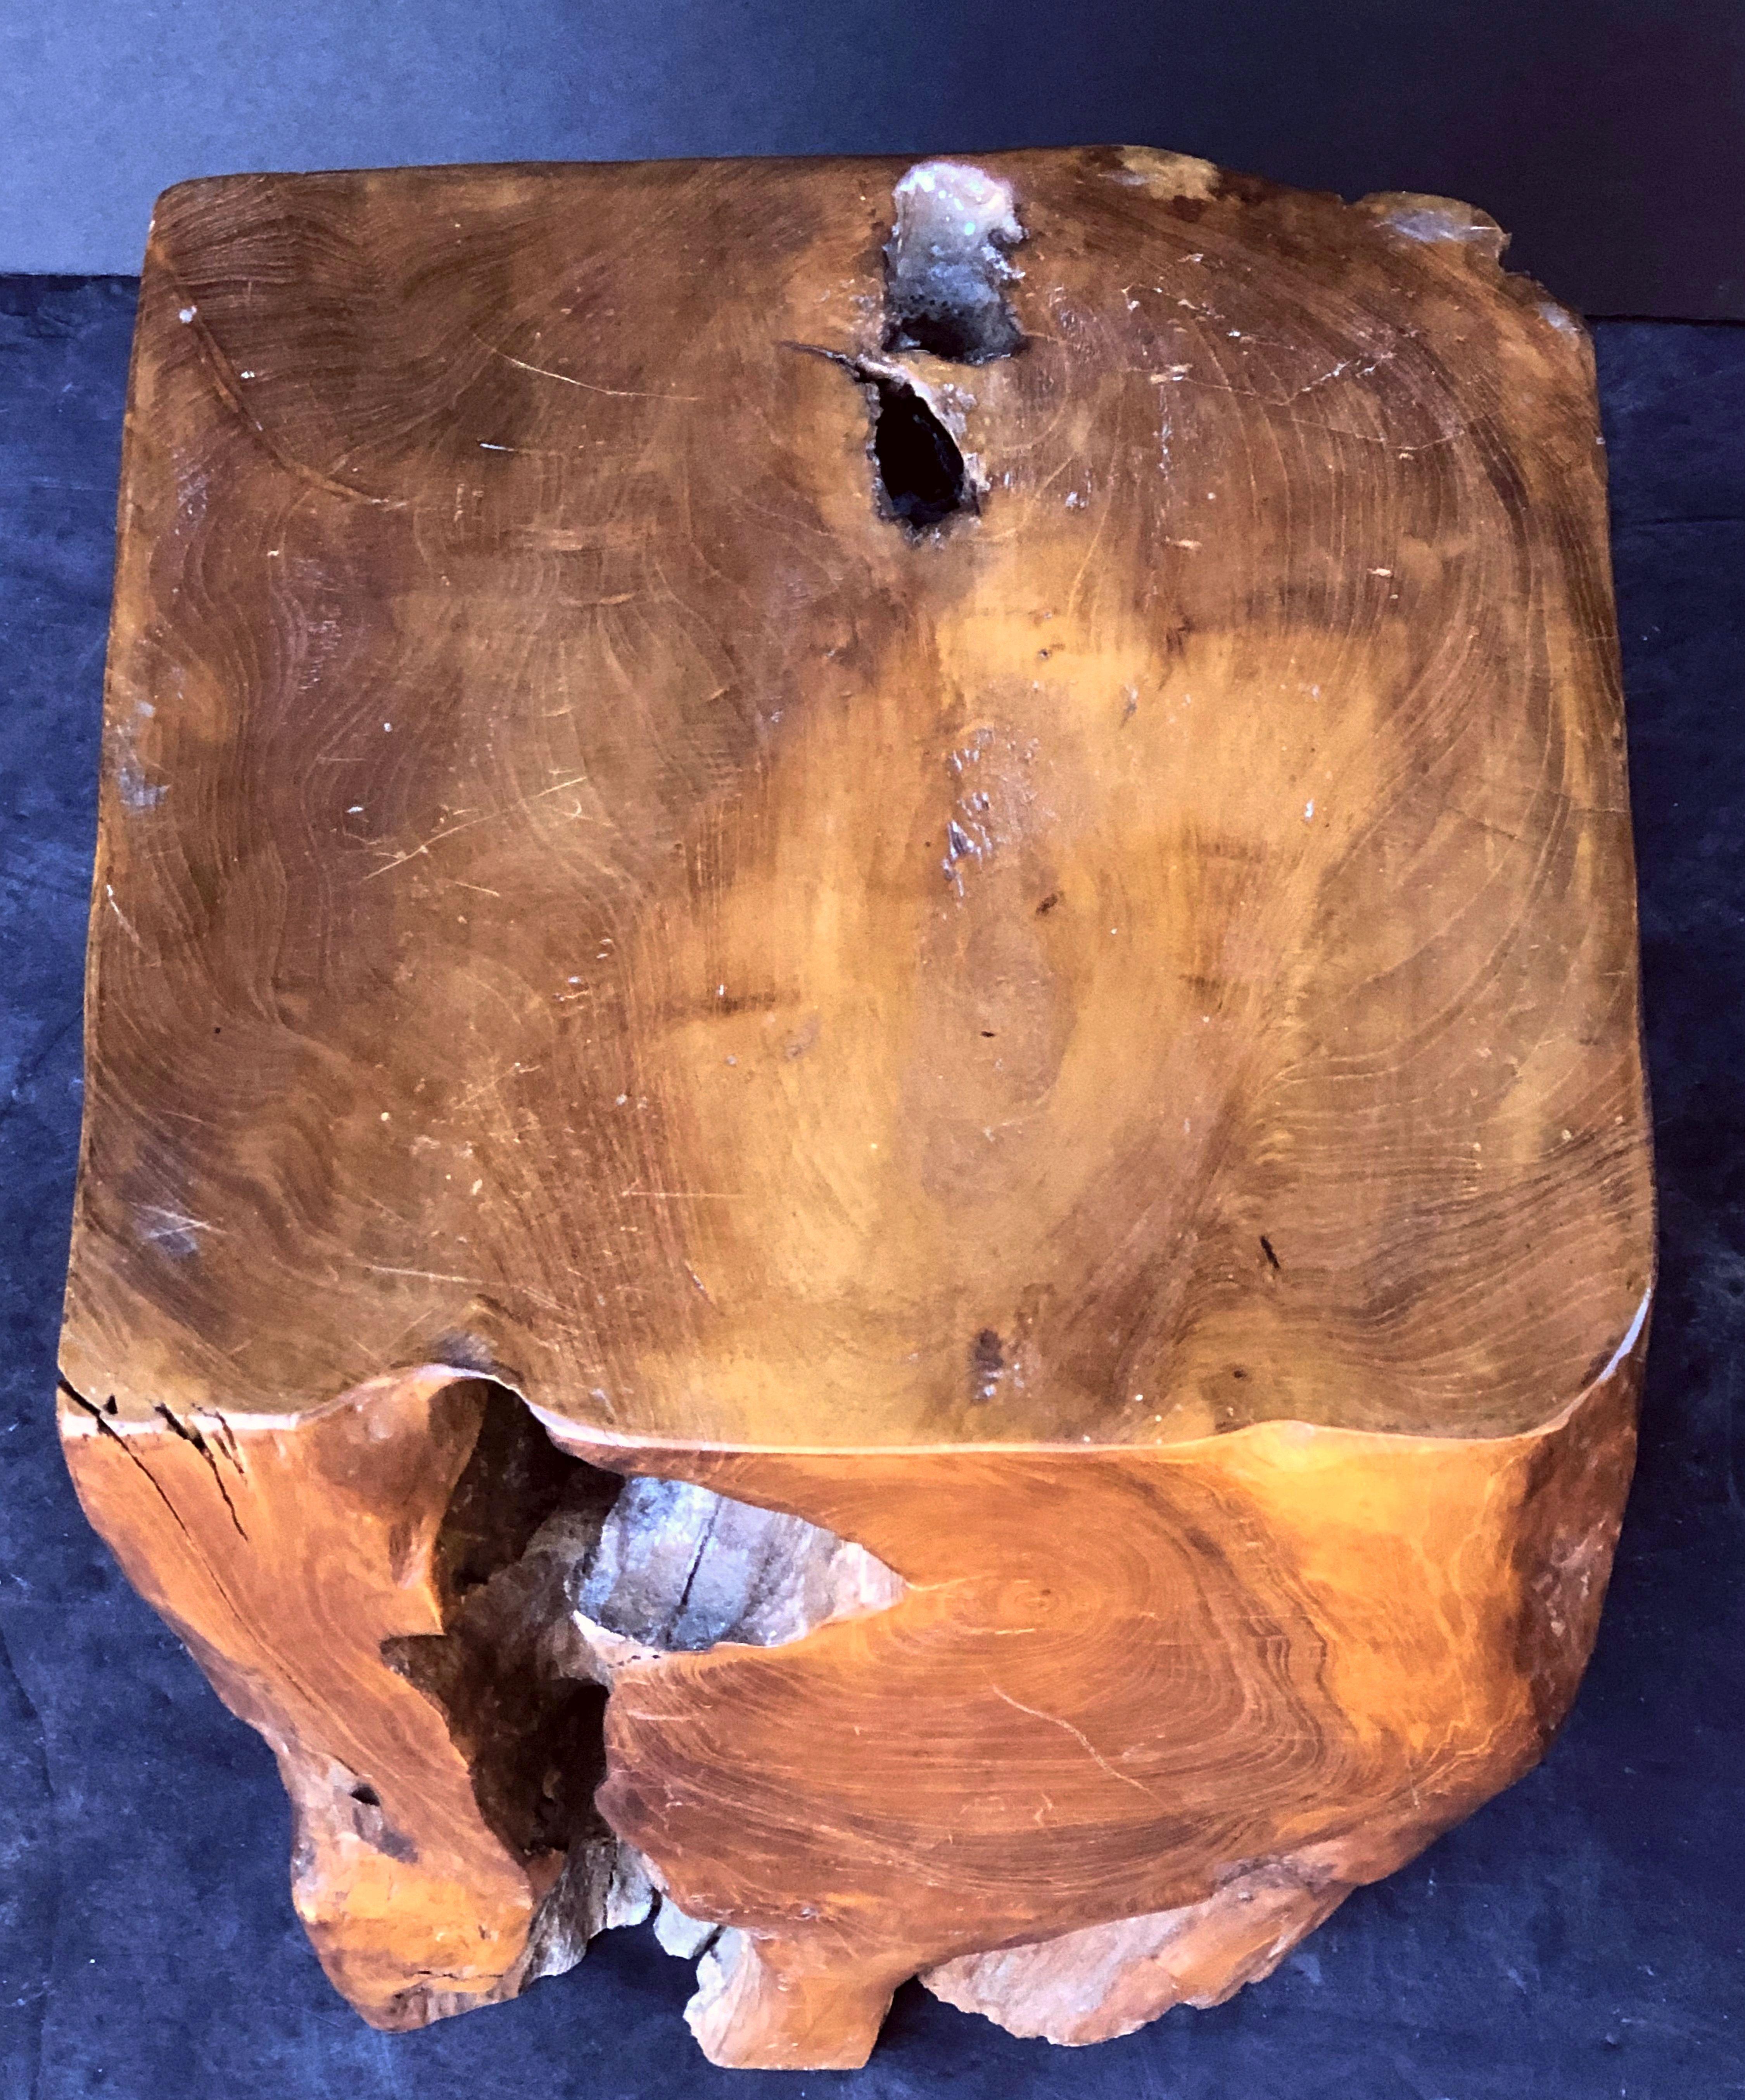 A fine rustic wood stool from England, of finely patinated naturalistic wood - Makes a great side or occasional table

Dimensions: H 15 1/2 inches x W 11 inches x D 11 inches.